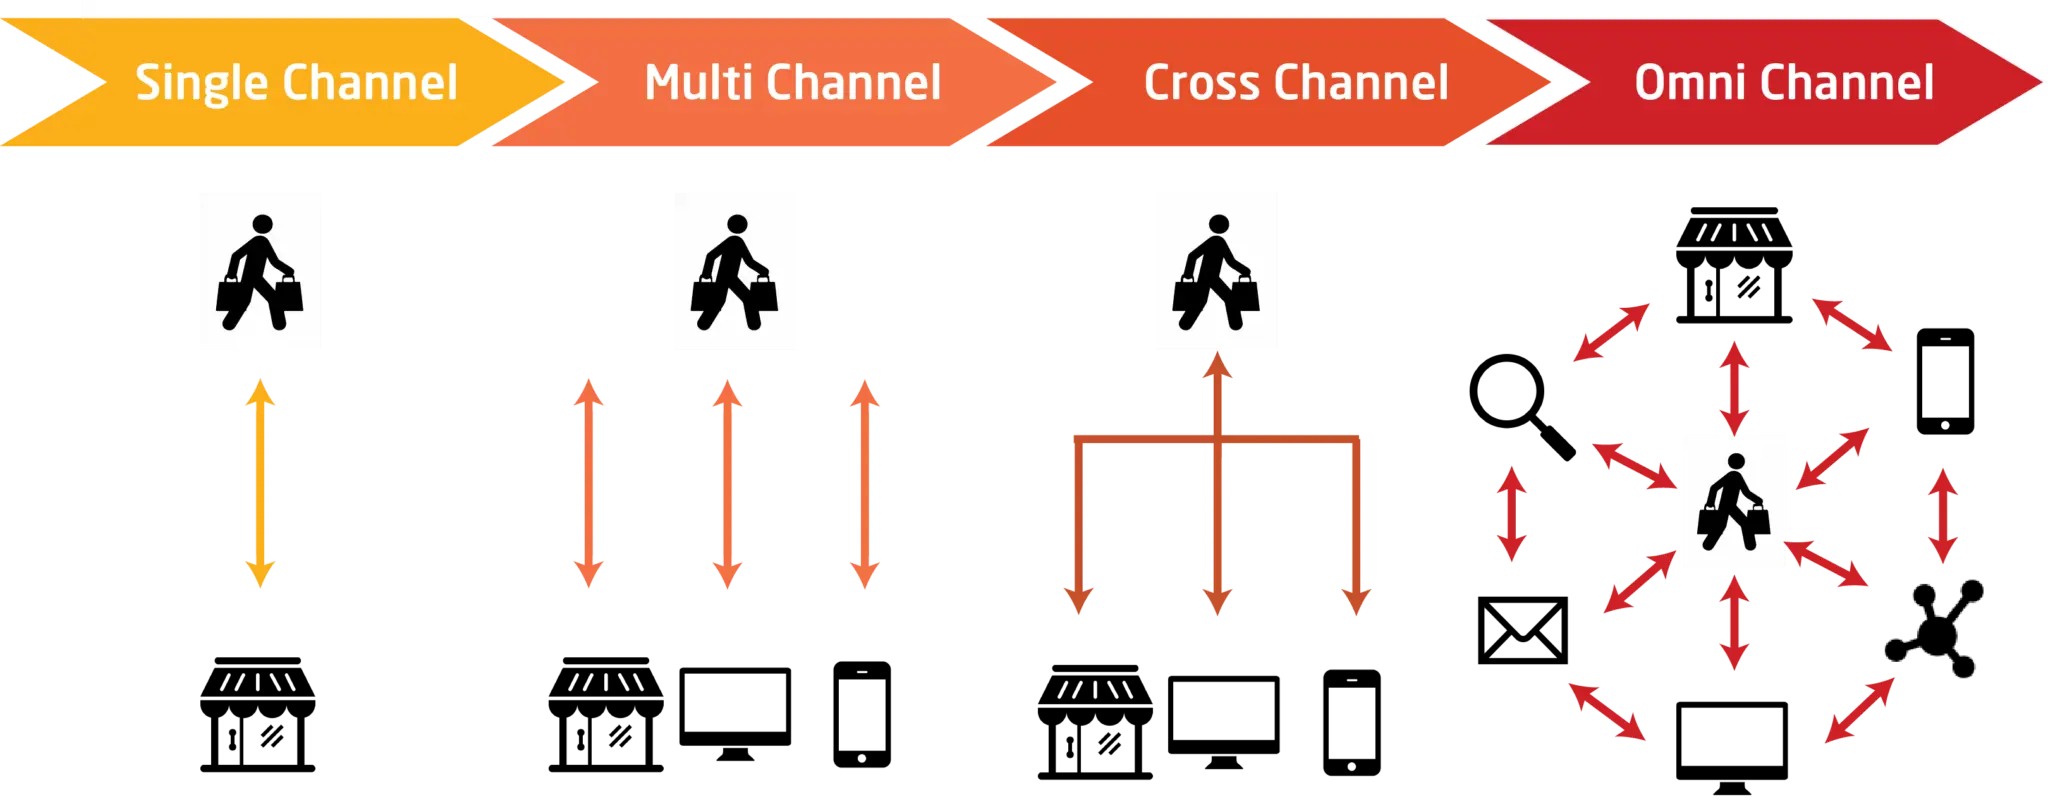 Diagram showing different channel delivery modes